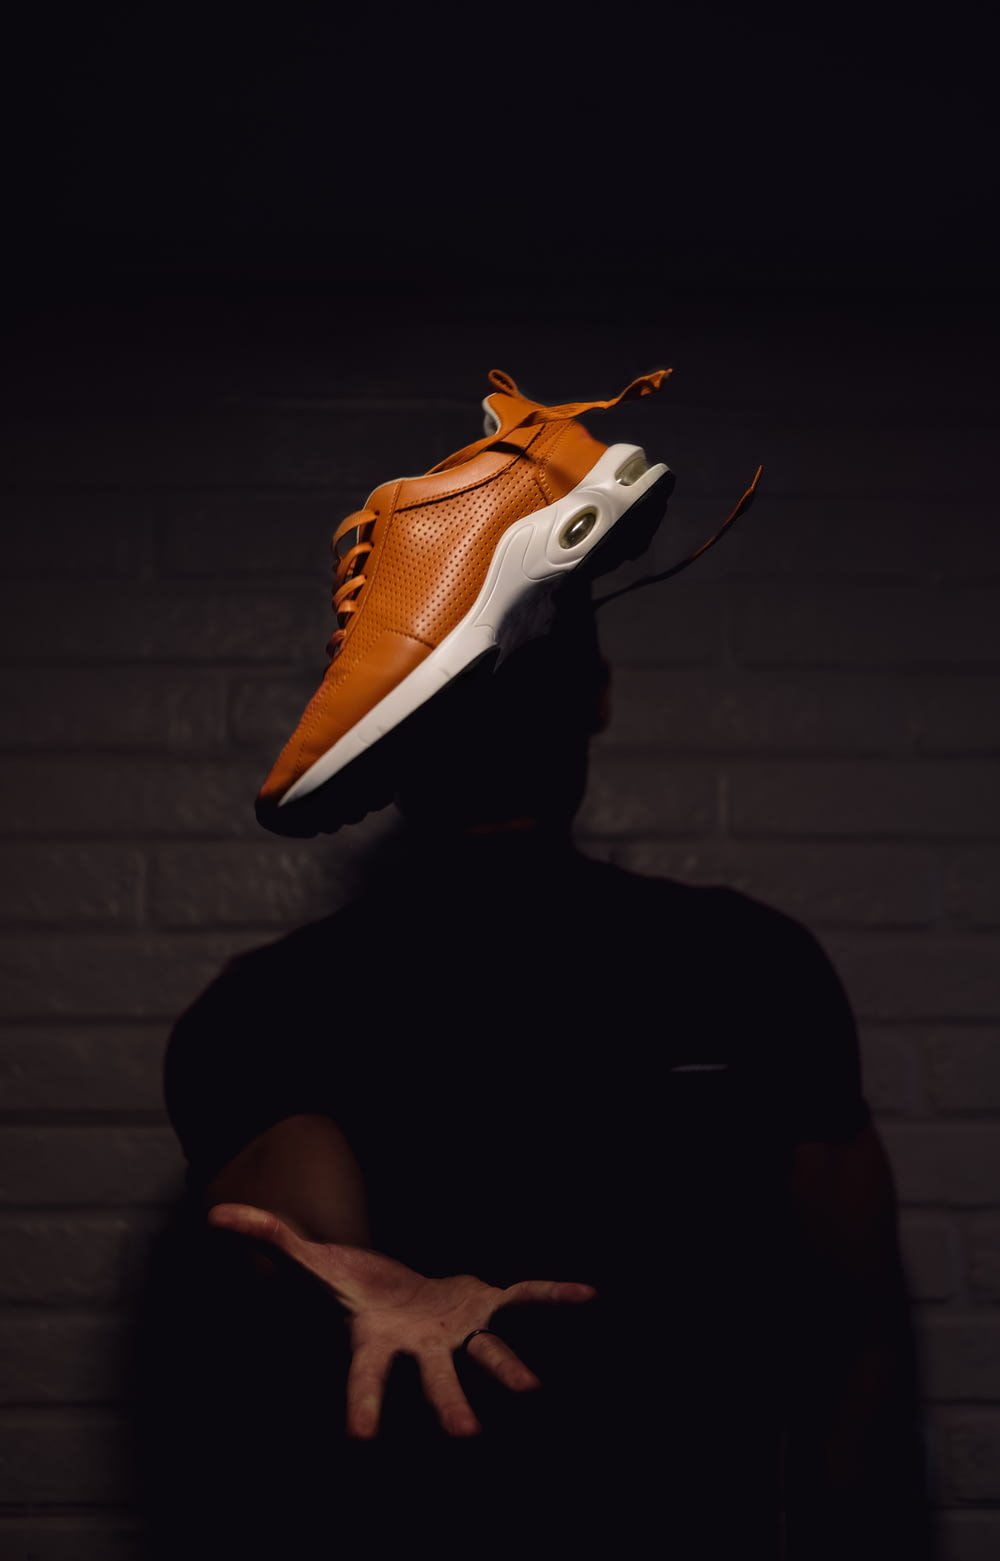 person wearing orange and white nike basketball shoes